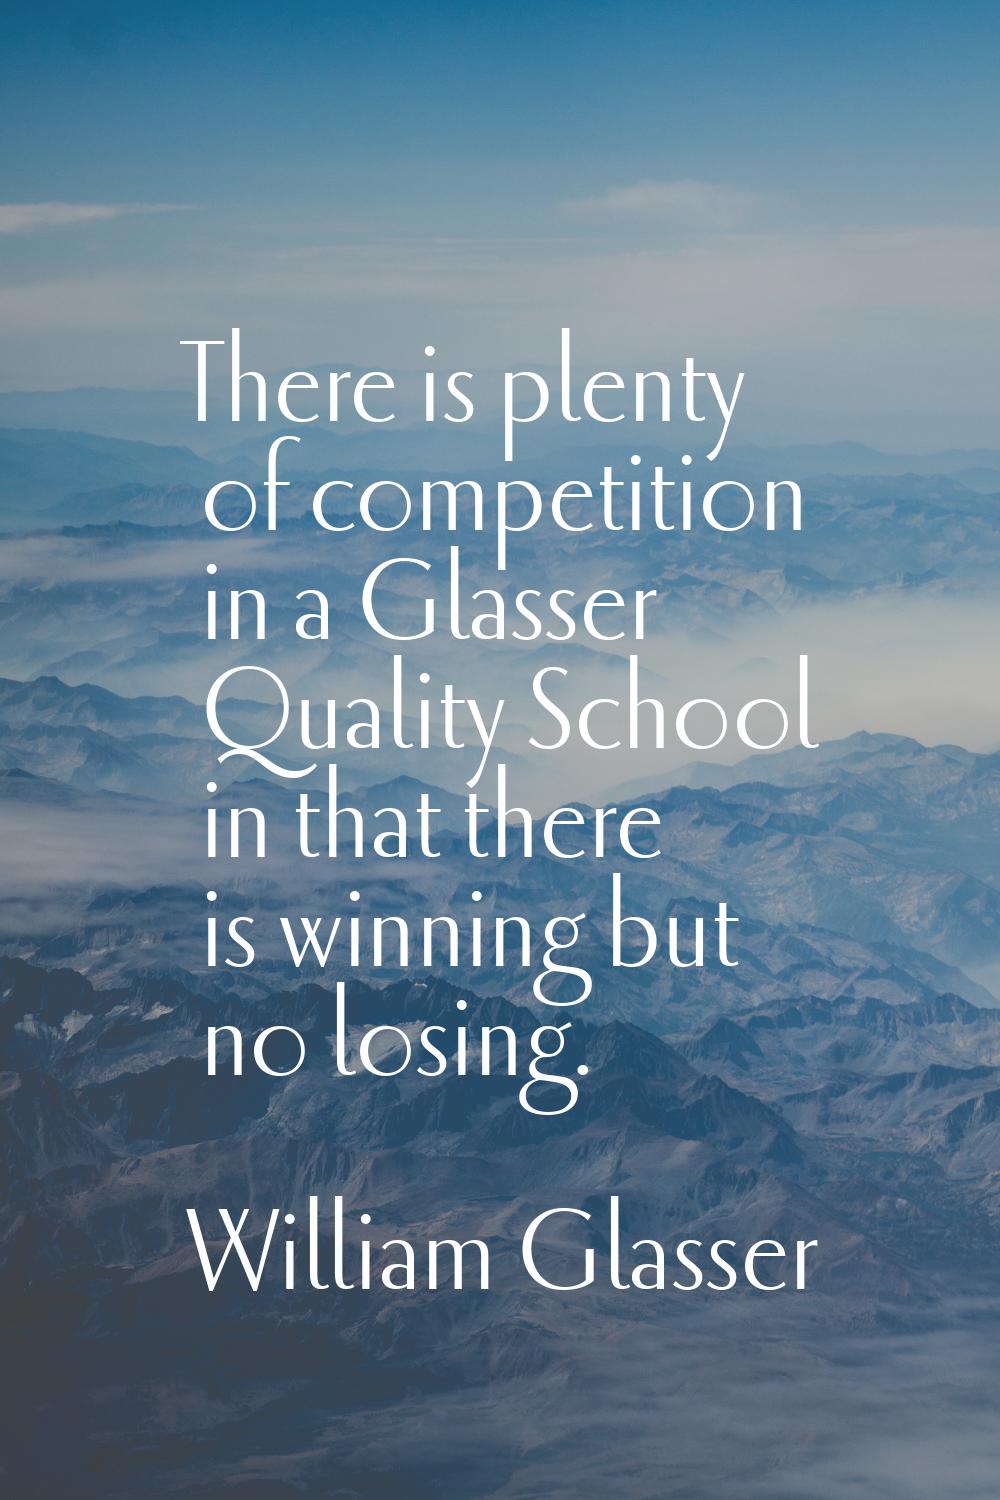 There is plenty of competition in a Glasser Quality School in that there is winning but no losing.